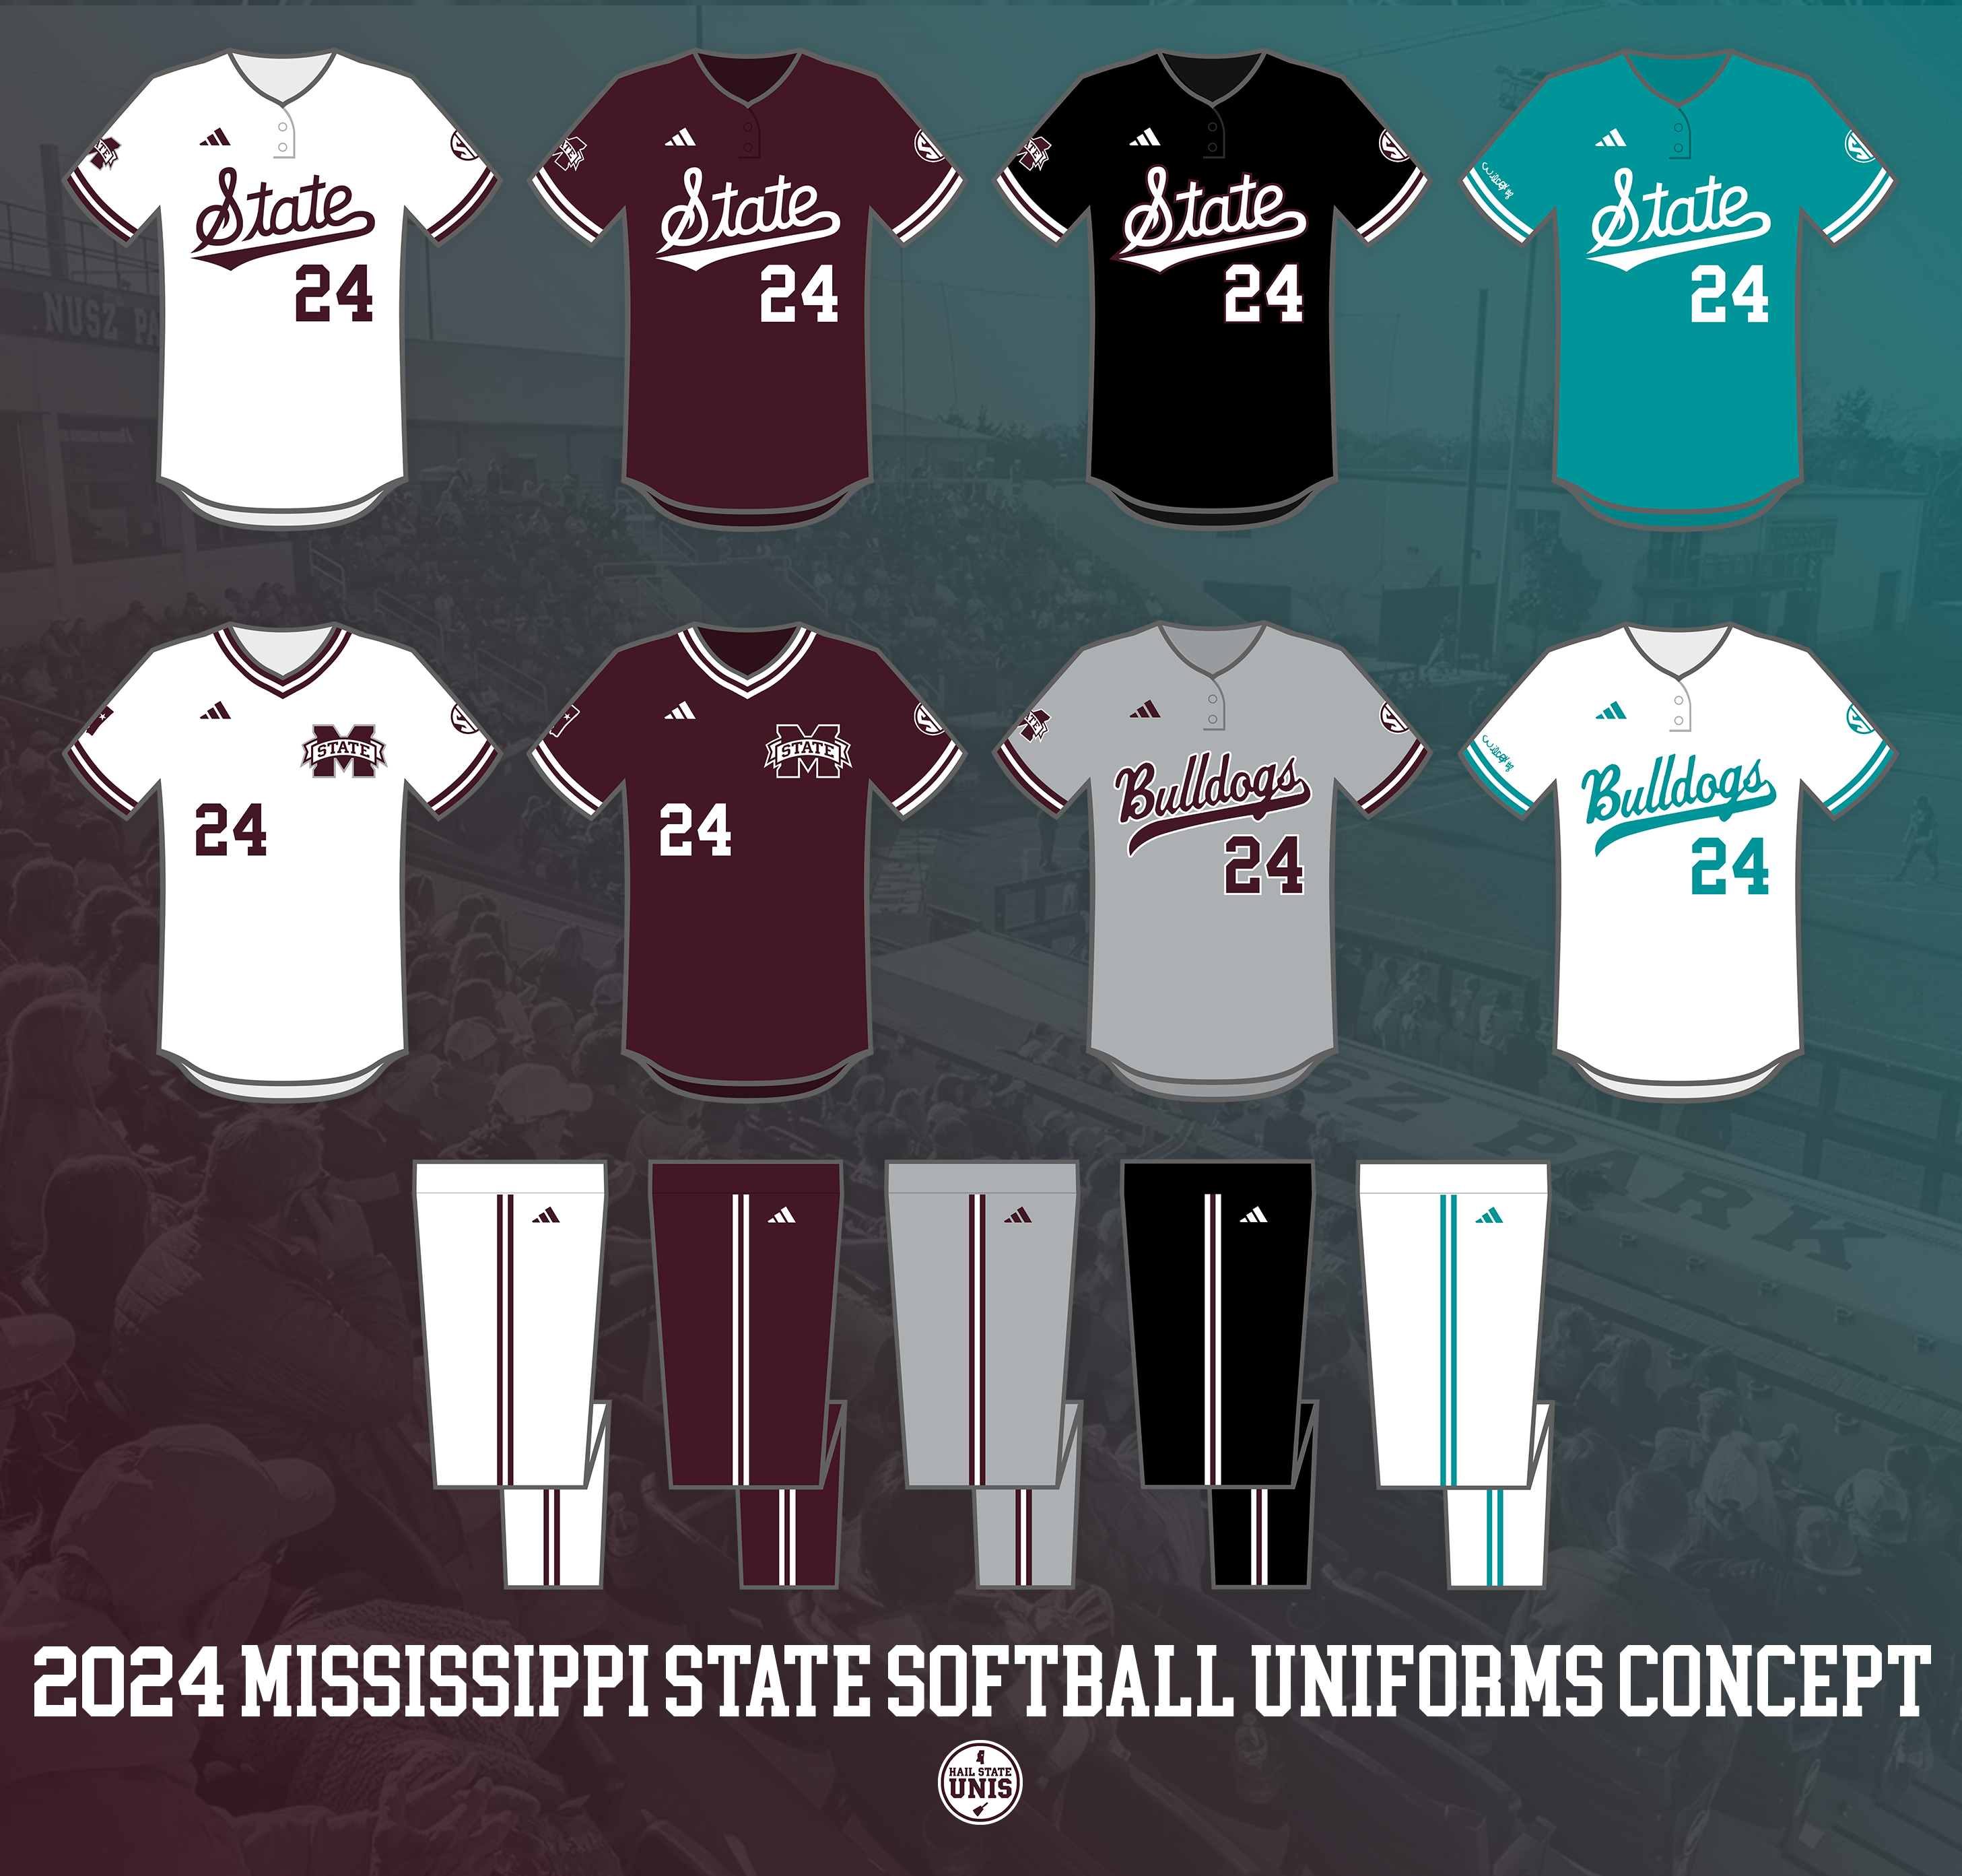 Football: 2020 Stretch Goals Concept - Hail State Unis